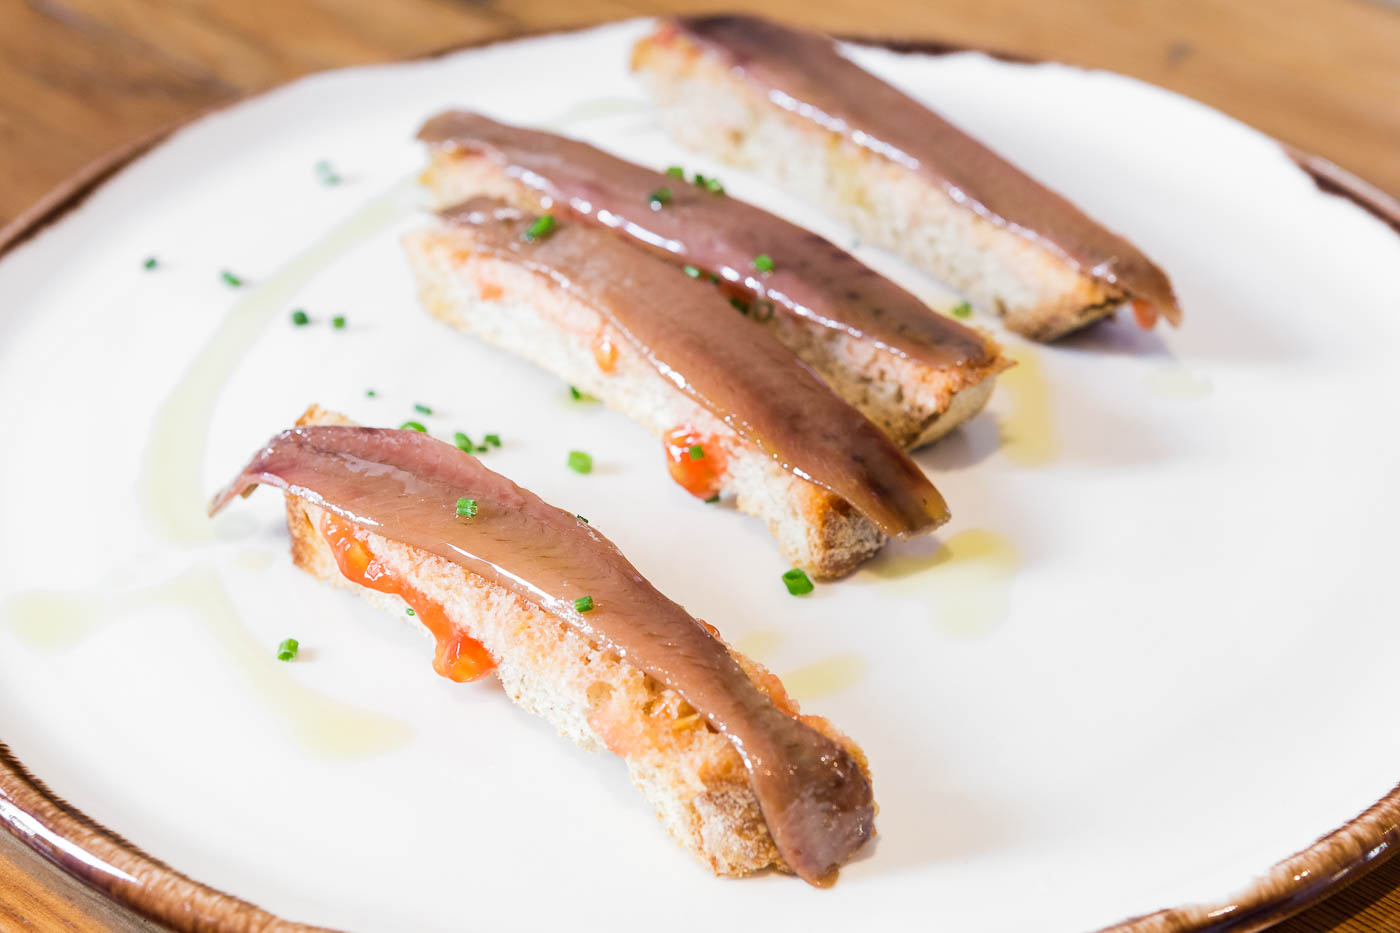 Anchovy over bread with tomato